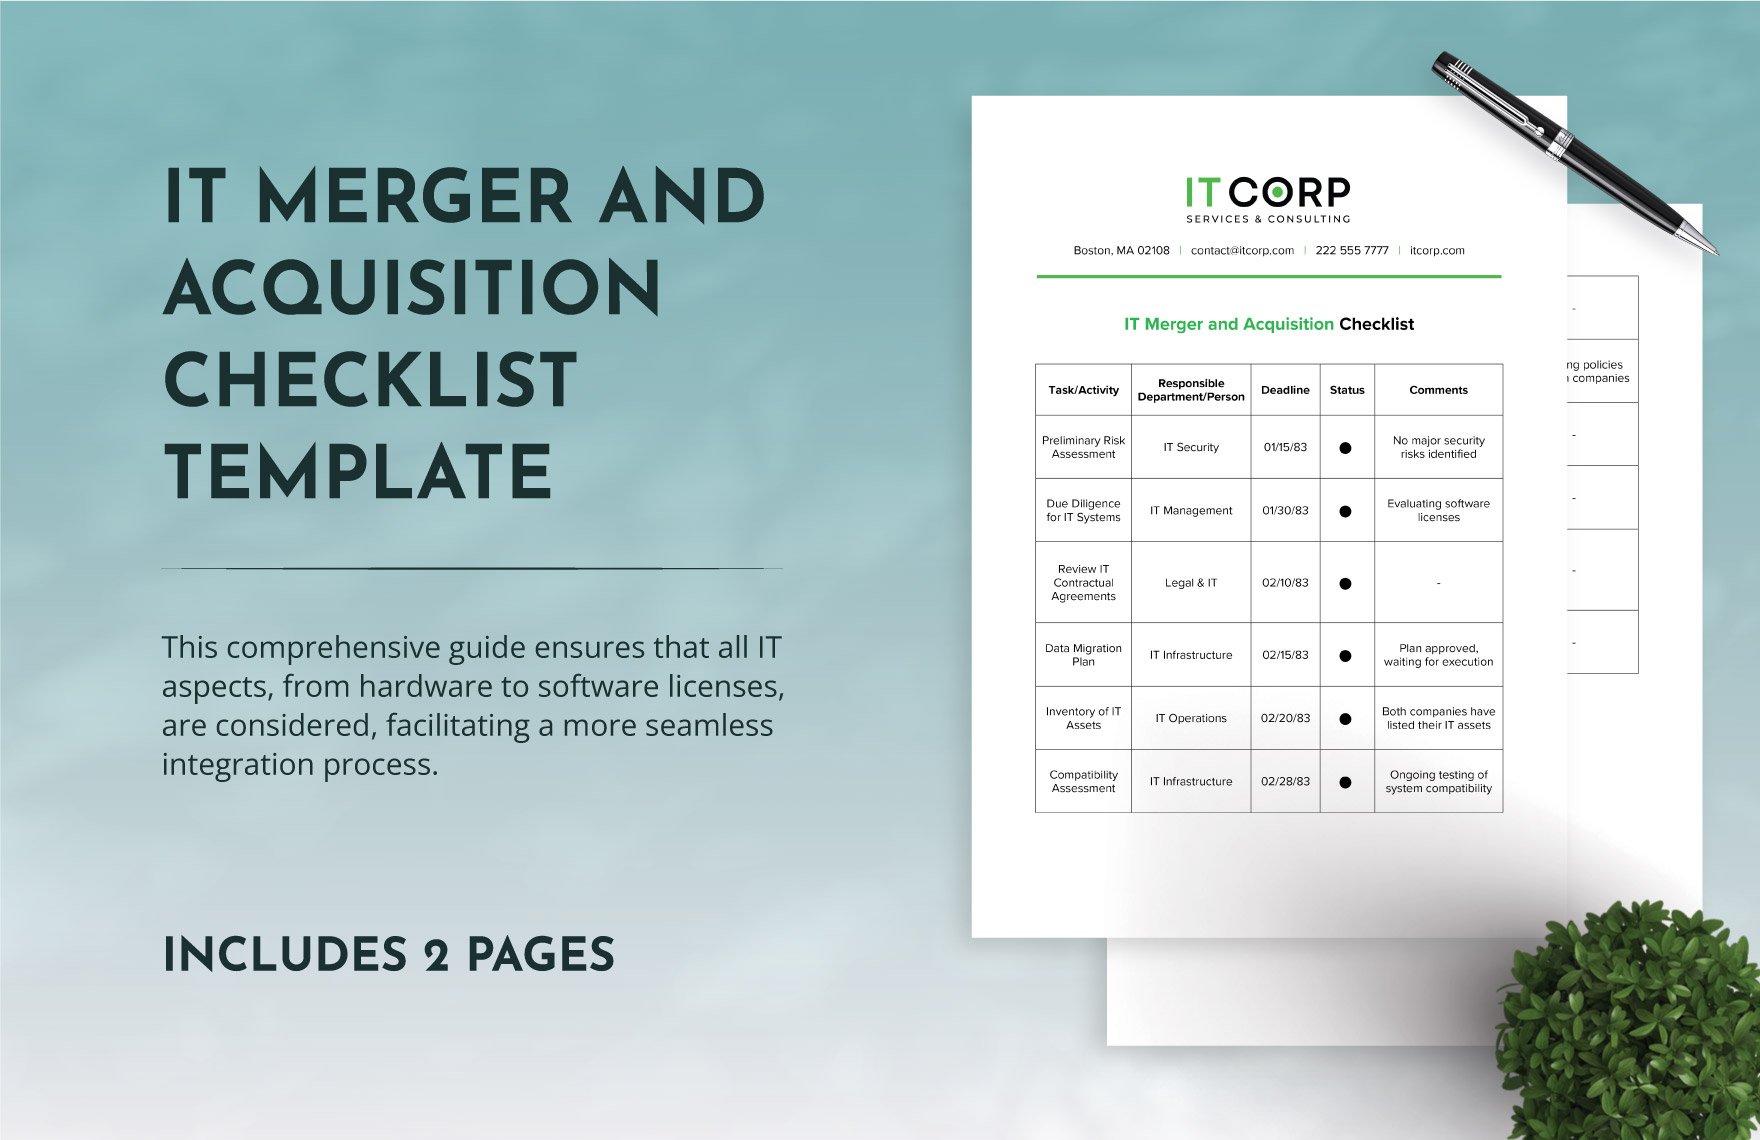 IT Merger and Acquisition Checklist Template in Word, Google Docs, PDF